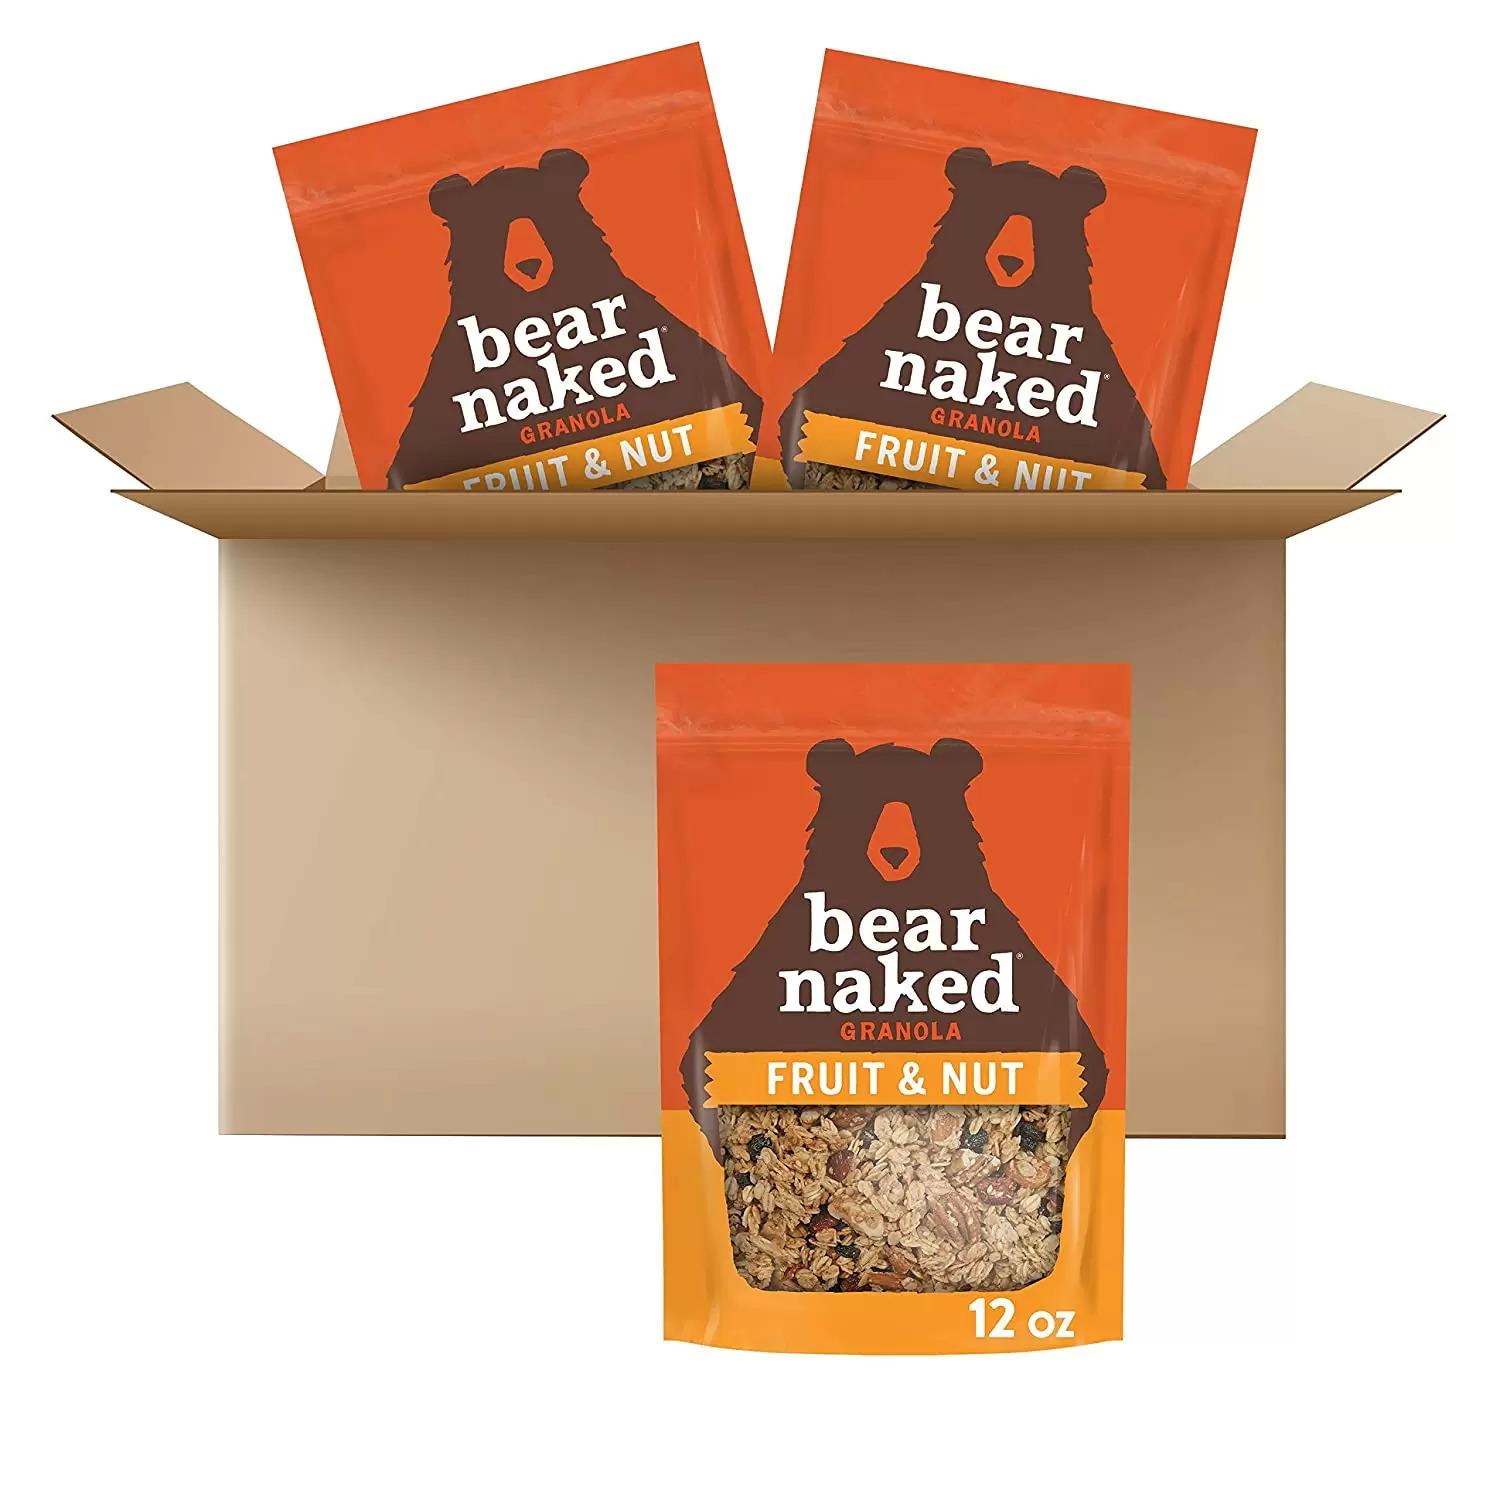 3 Packs of Bear Naked Granola Fruit and Nut for $7.22 Shipped